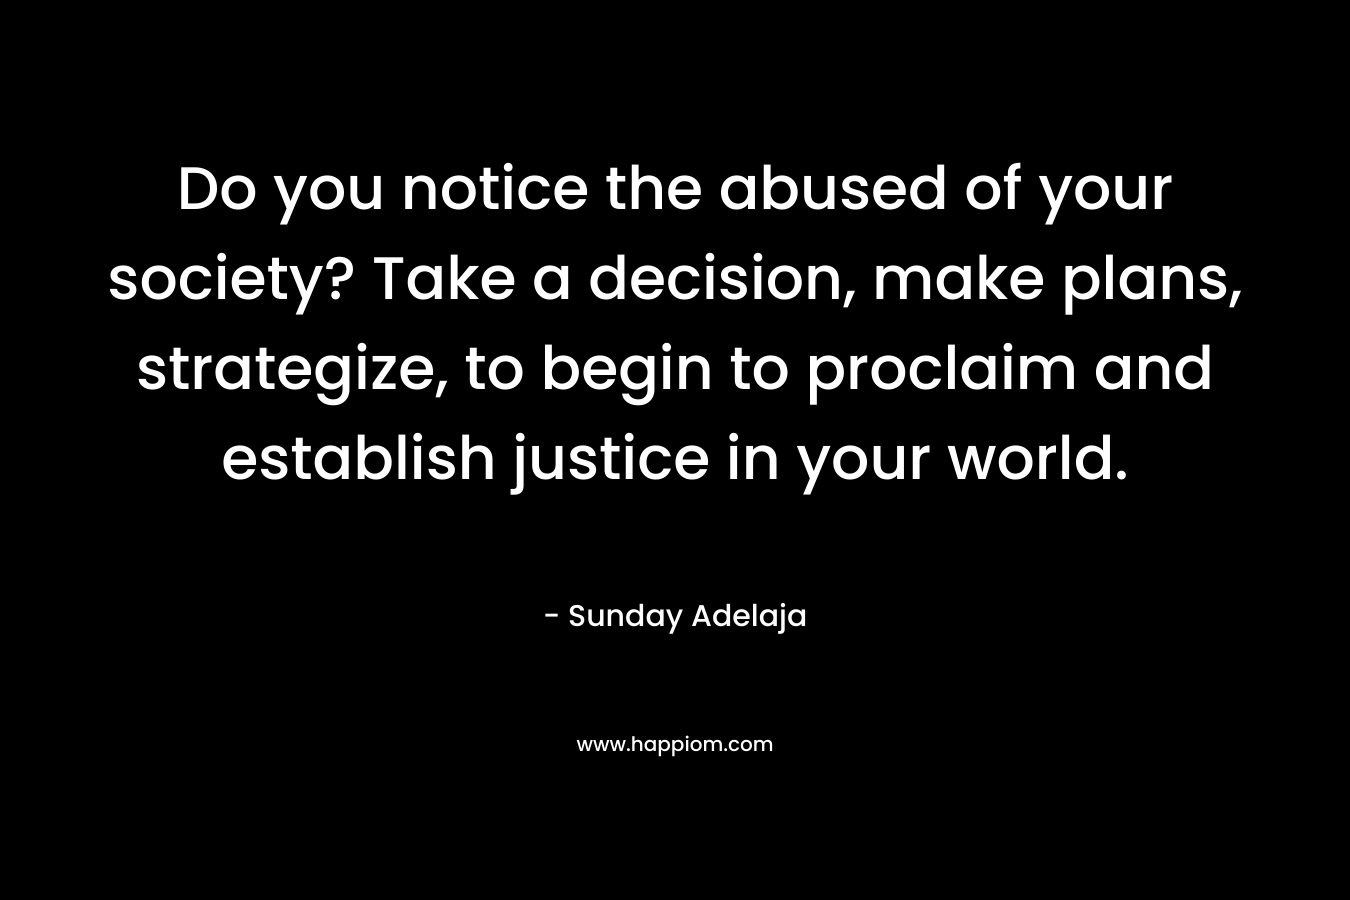 Do you notice the abused of your society? Take a decision, make plans, strategize, to begin to proclaim and establish justice in your world.